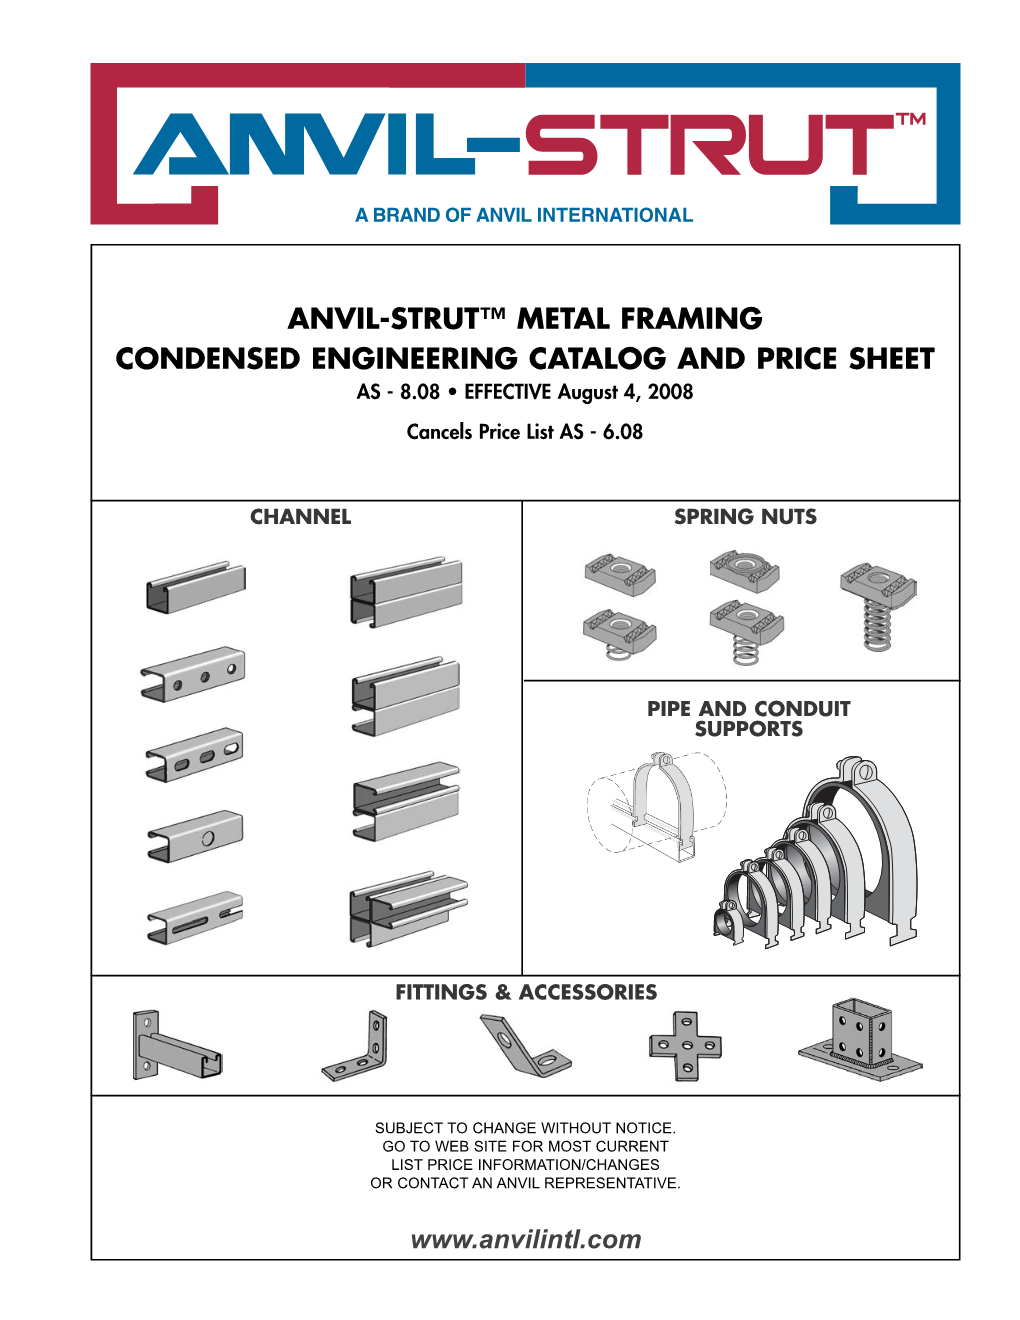 ANVIL-STRUT™ METAL FRAMING CONDENSED ENGINEERING CATALOG and PRICE SHEET AS - 8.08 • EFFECTIVE August 4, 2008 Cancels Price List AS - 6.08